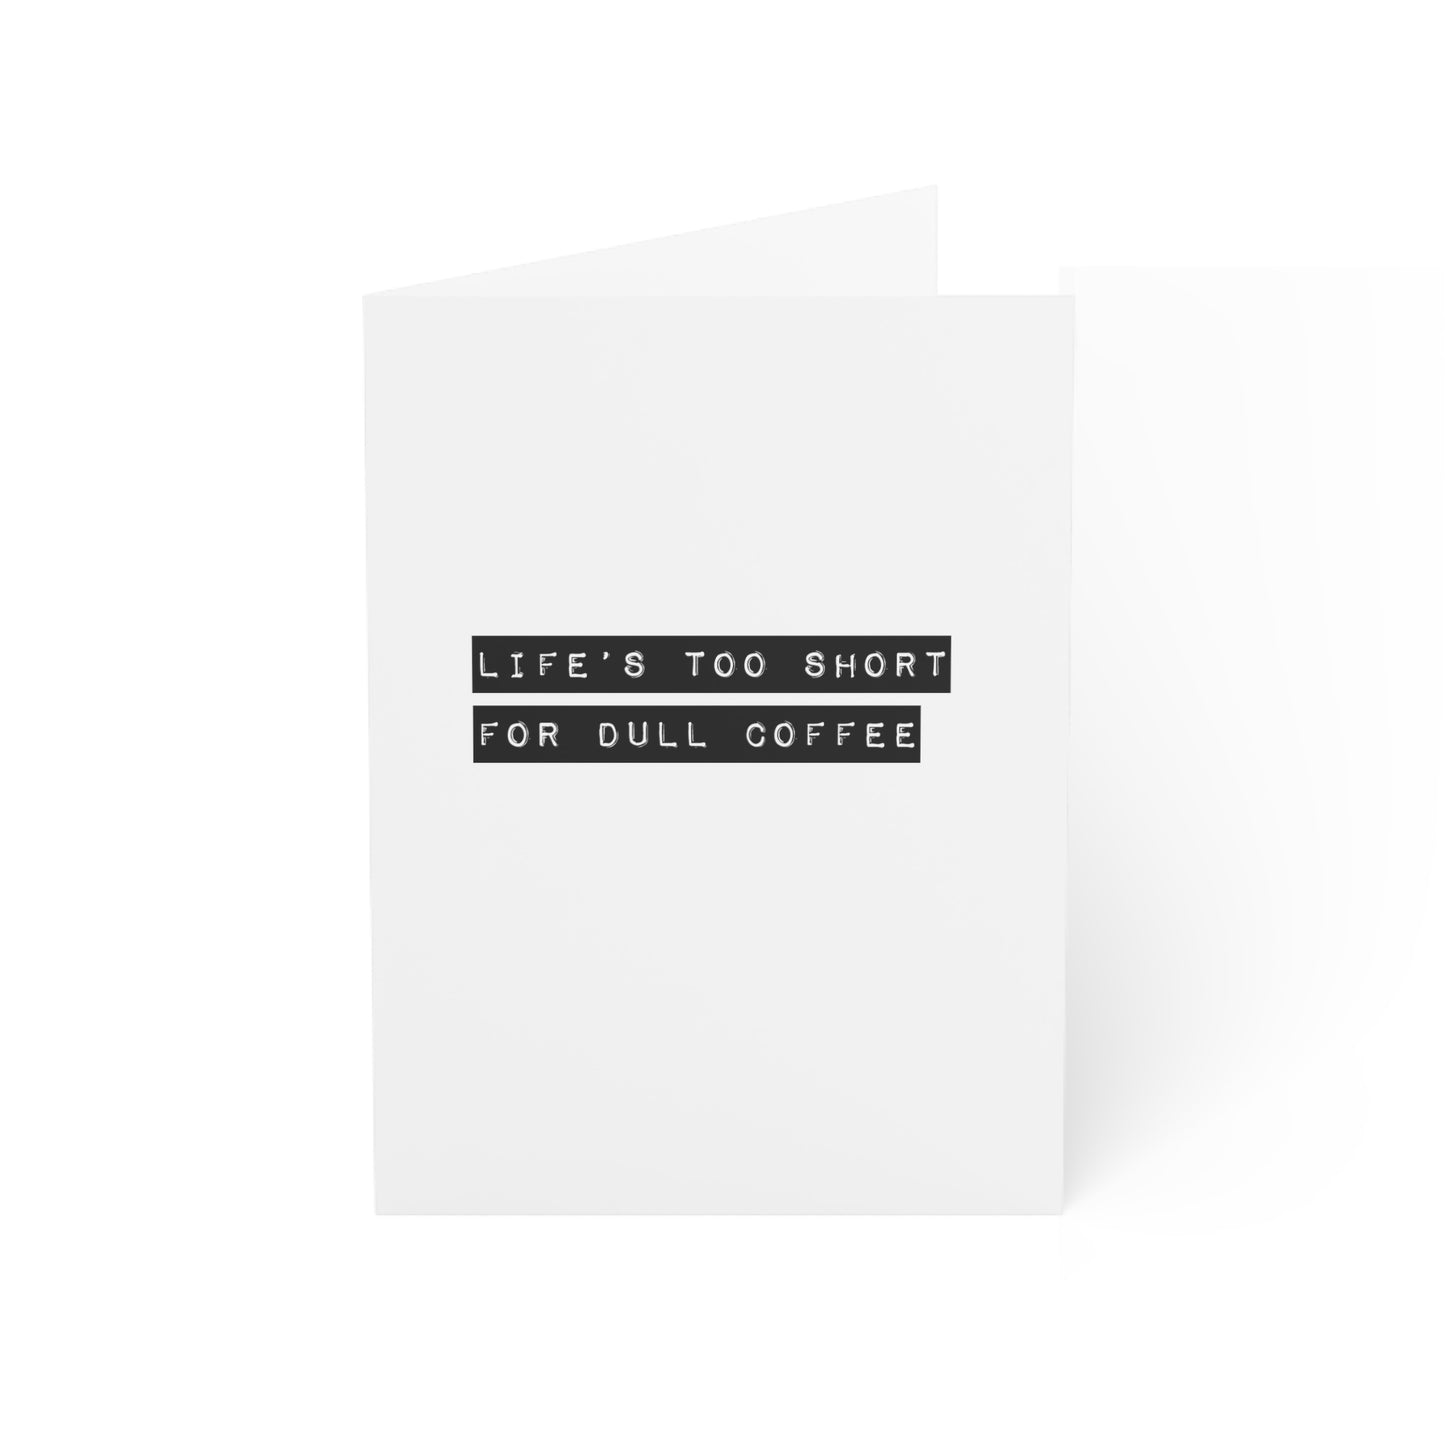 Life's Too Short for Dull Coffee Greeting Cards